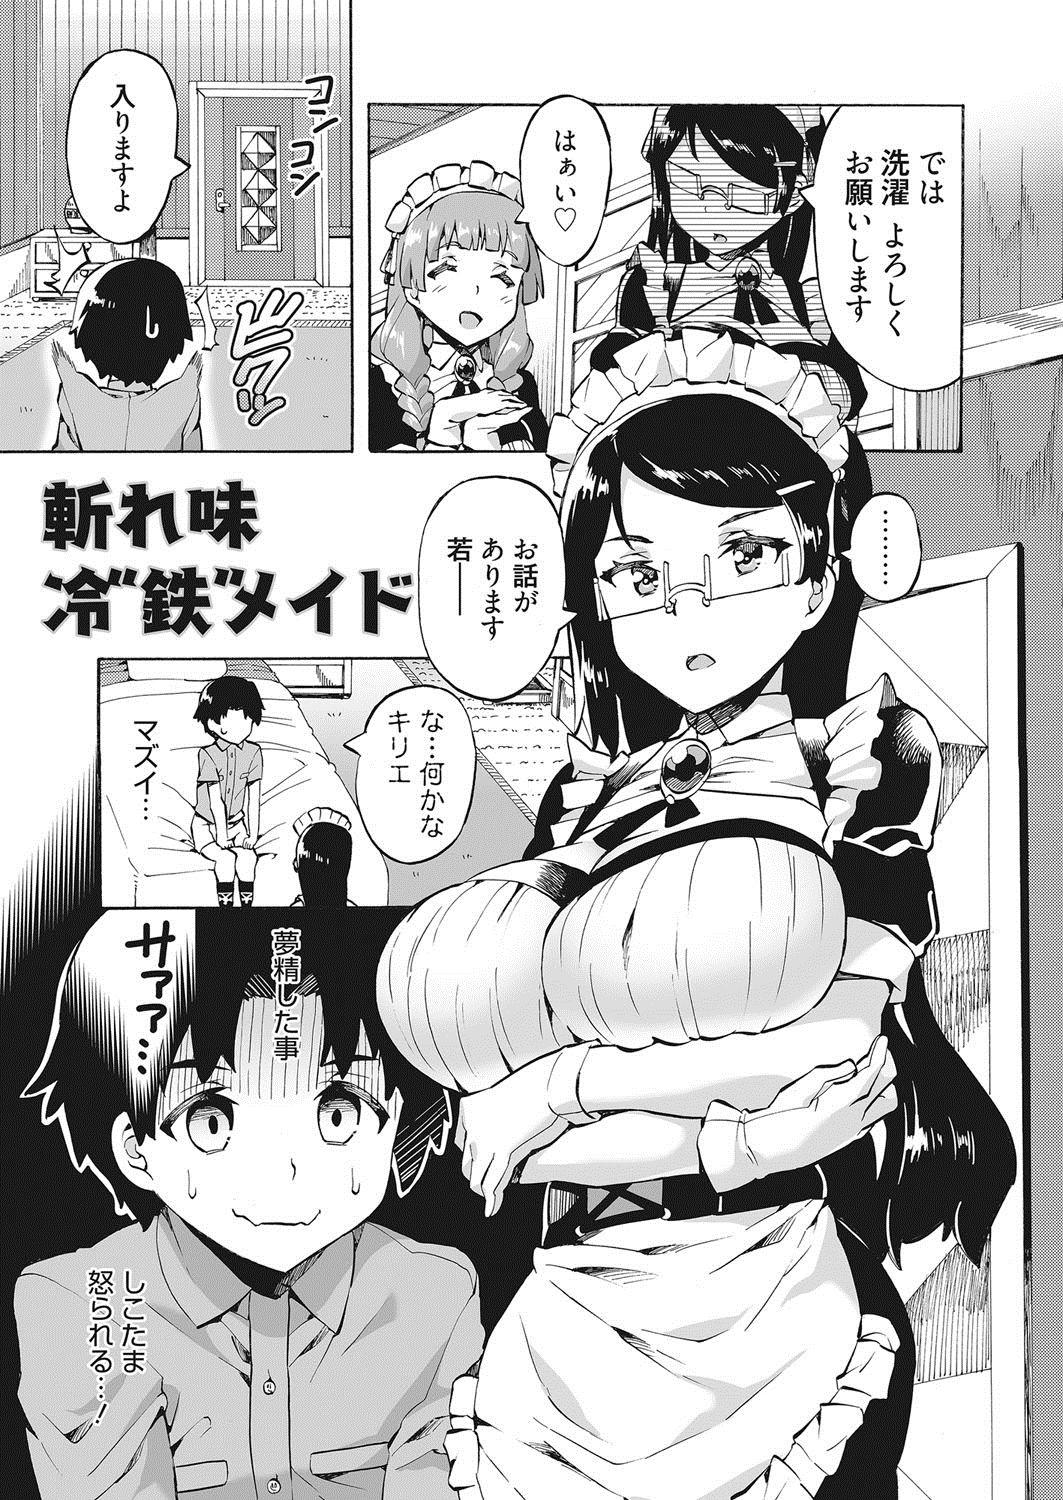 Whores Maid x Shounen x Maid Teenfuns - Page 4